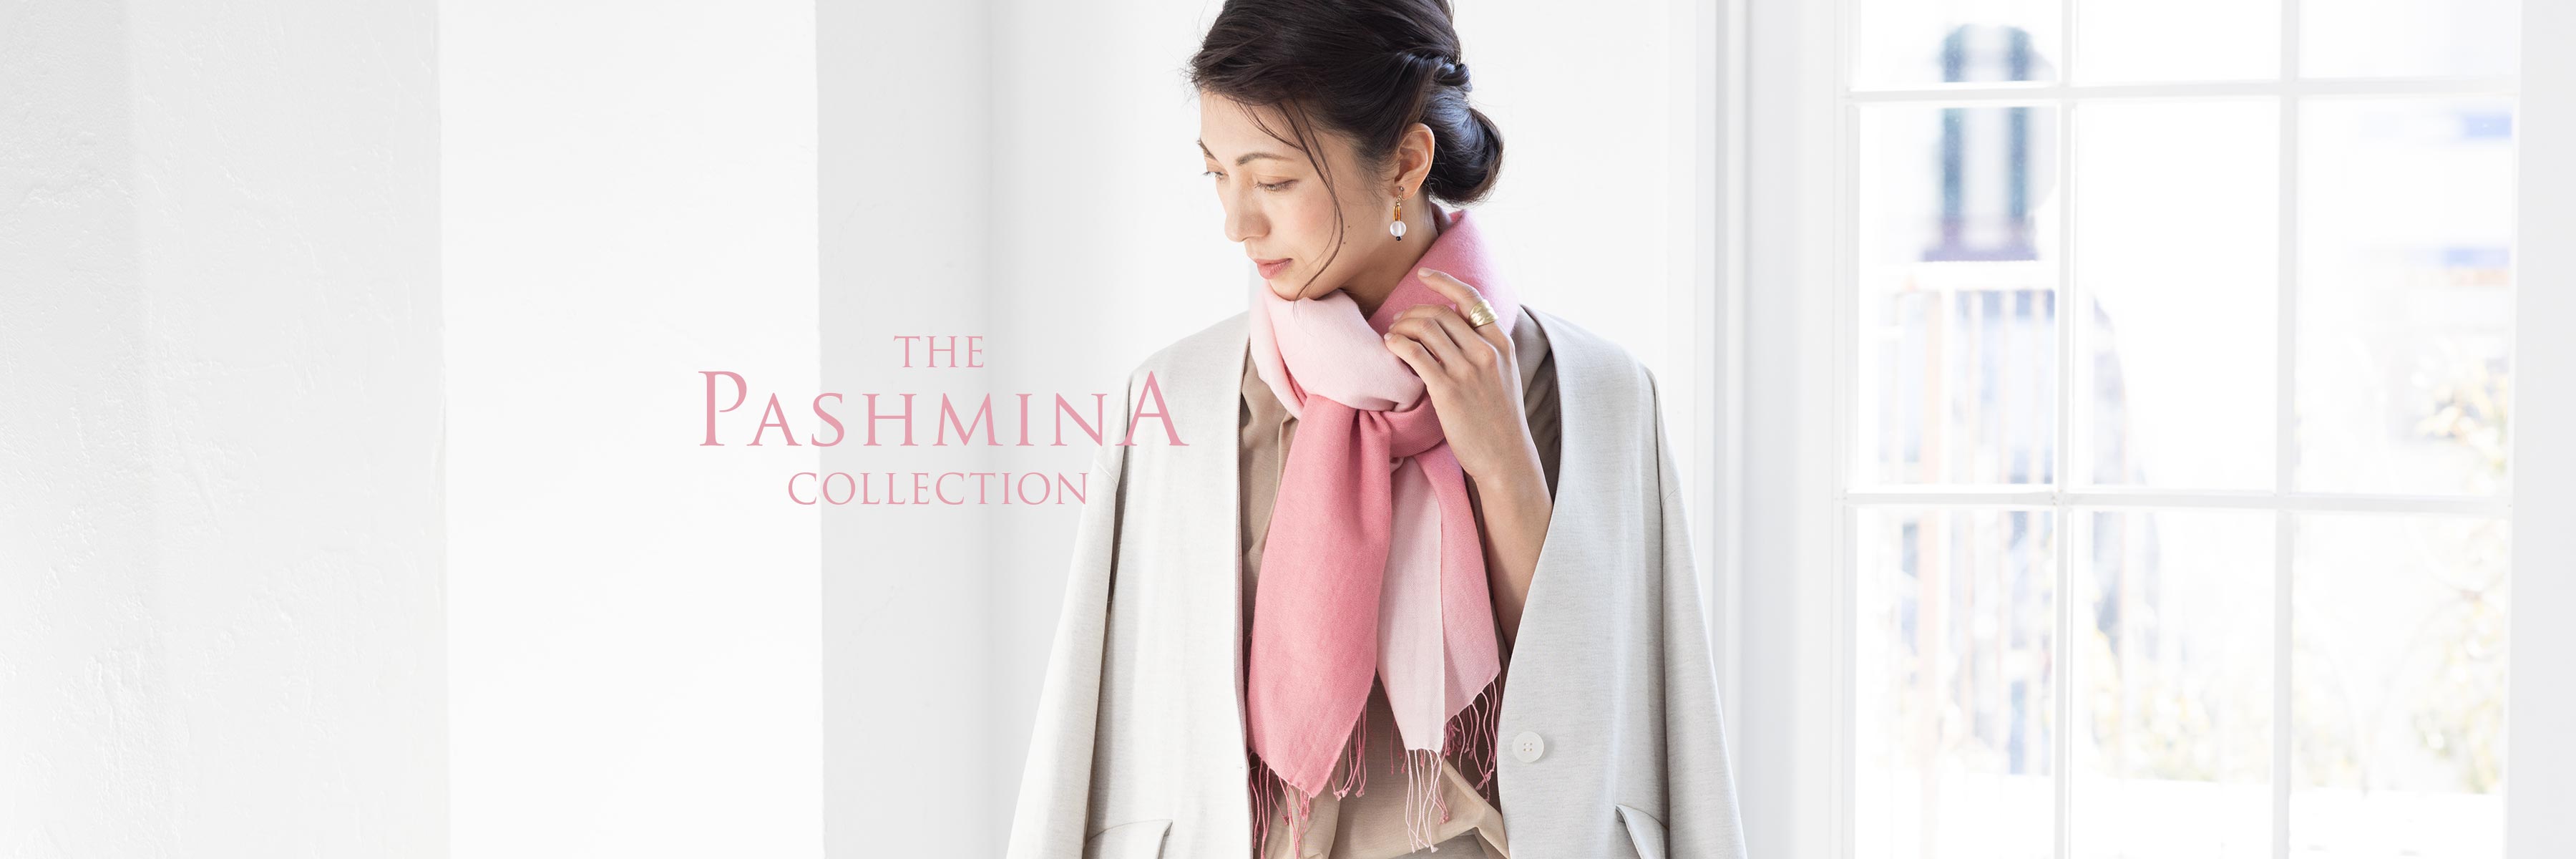 The Pashmina Collection